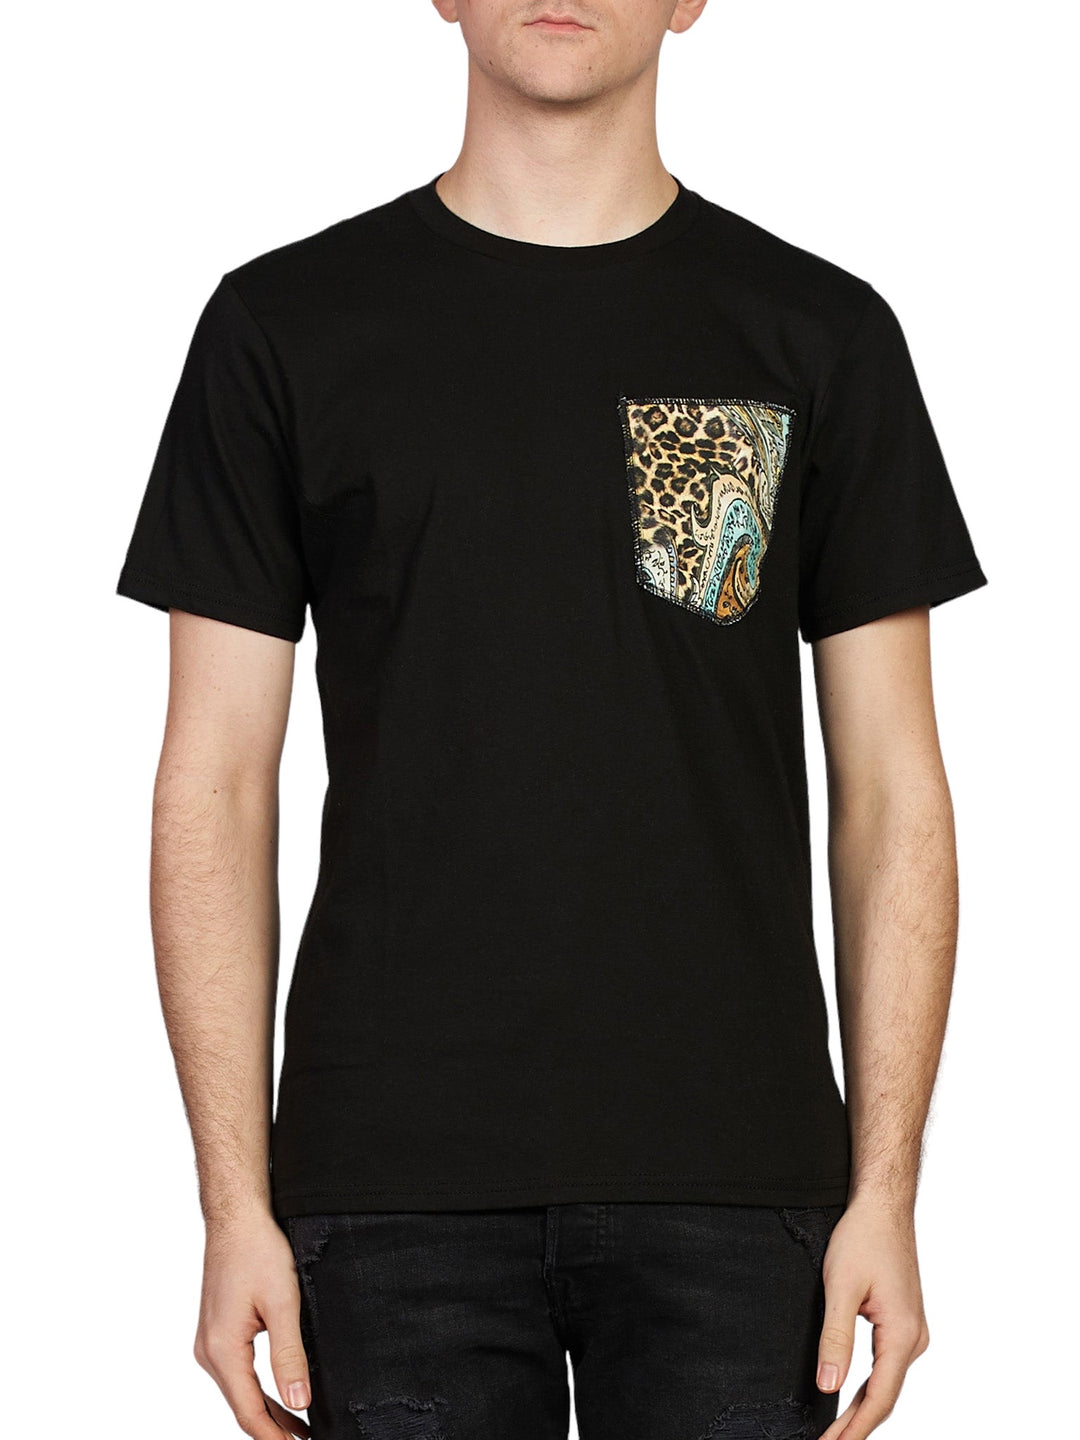 Tee Shirt with Leopard/Paisley Pocket in Black (25% OFF)